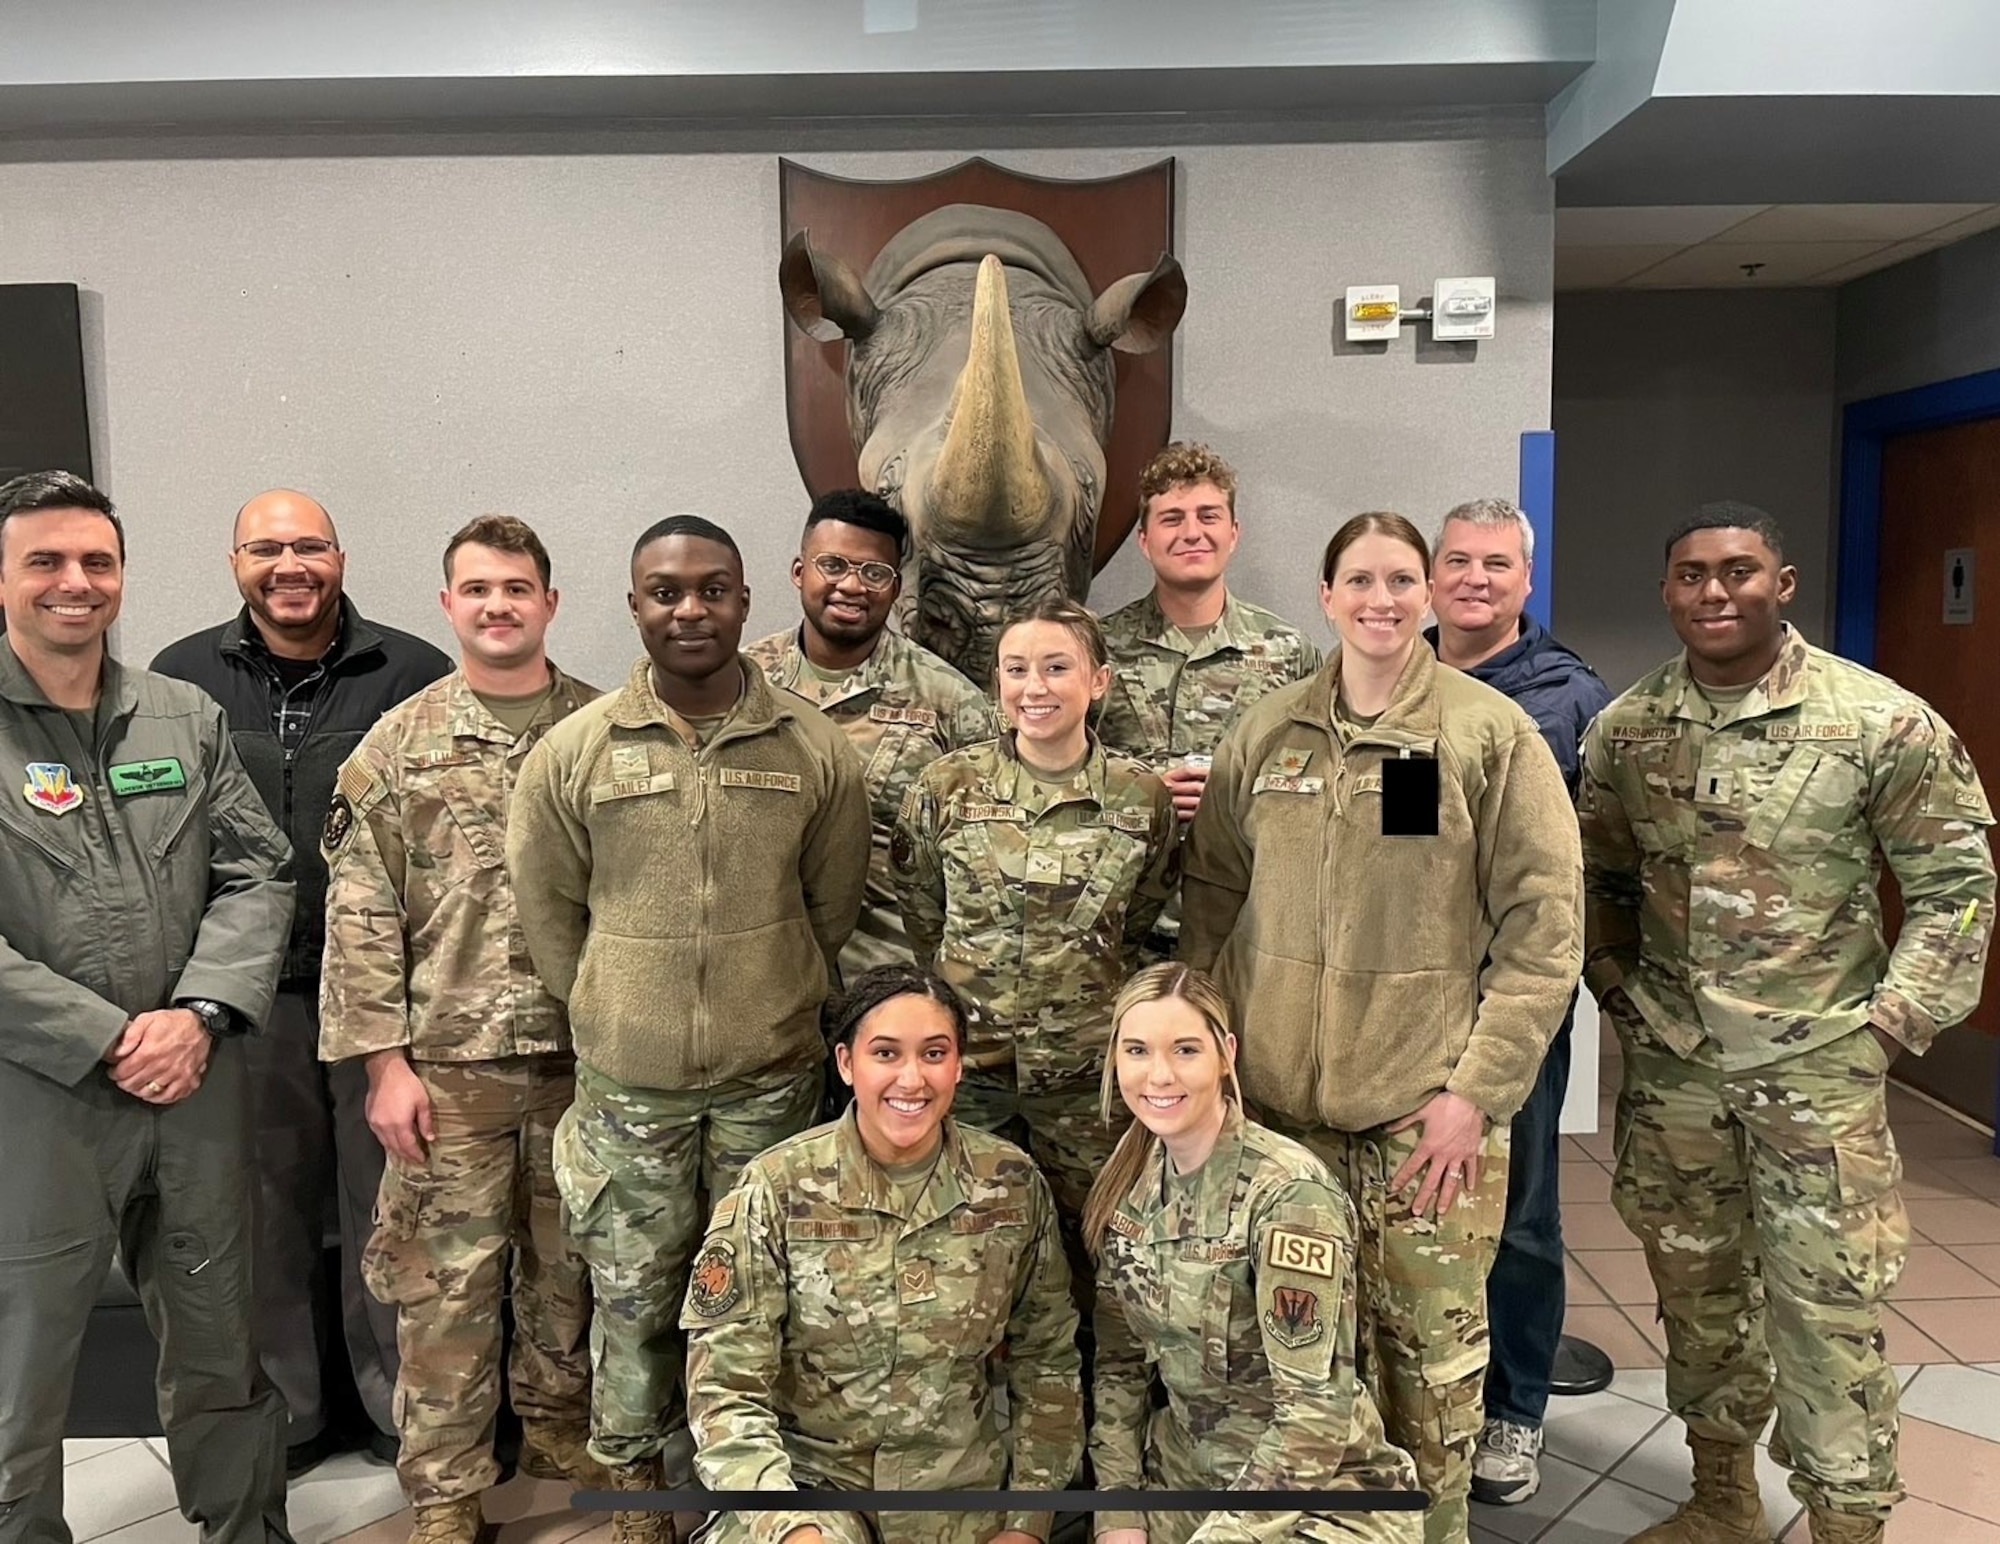 U.S. Air Force members from the 39th Electronic Warfare Squadron and 453rd EWS pose for a group photo while attending Red Flag 23-1 at Nellis Air Force Base, Nev., Jan. 25, 2023. The 39th EWS and 453rd EWS both attended Red Flag 23-1 to support the Intelligence, Surveillance and Reconnaissance mission for units participating. (U.S. Air Force photo by 1st Lt. Benjamin Aronson) (This photo has been altered for security purposes by blurring out a security badge.)